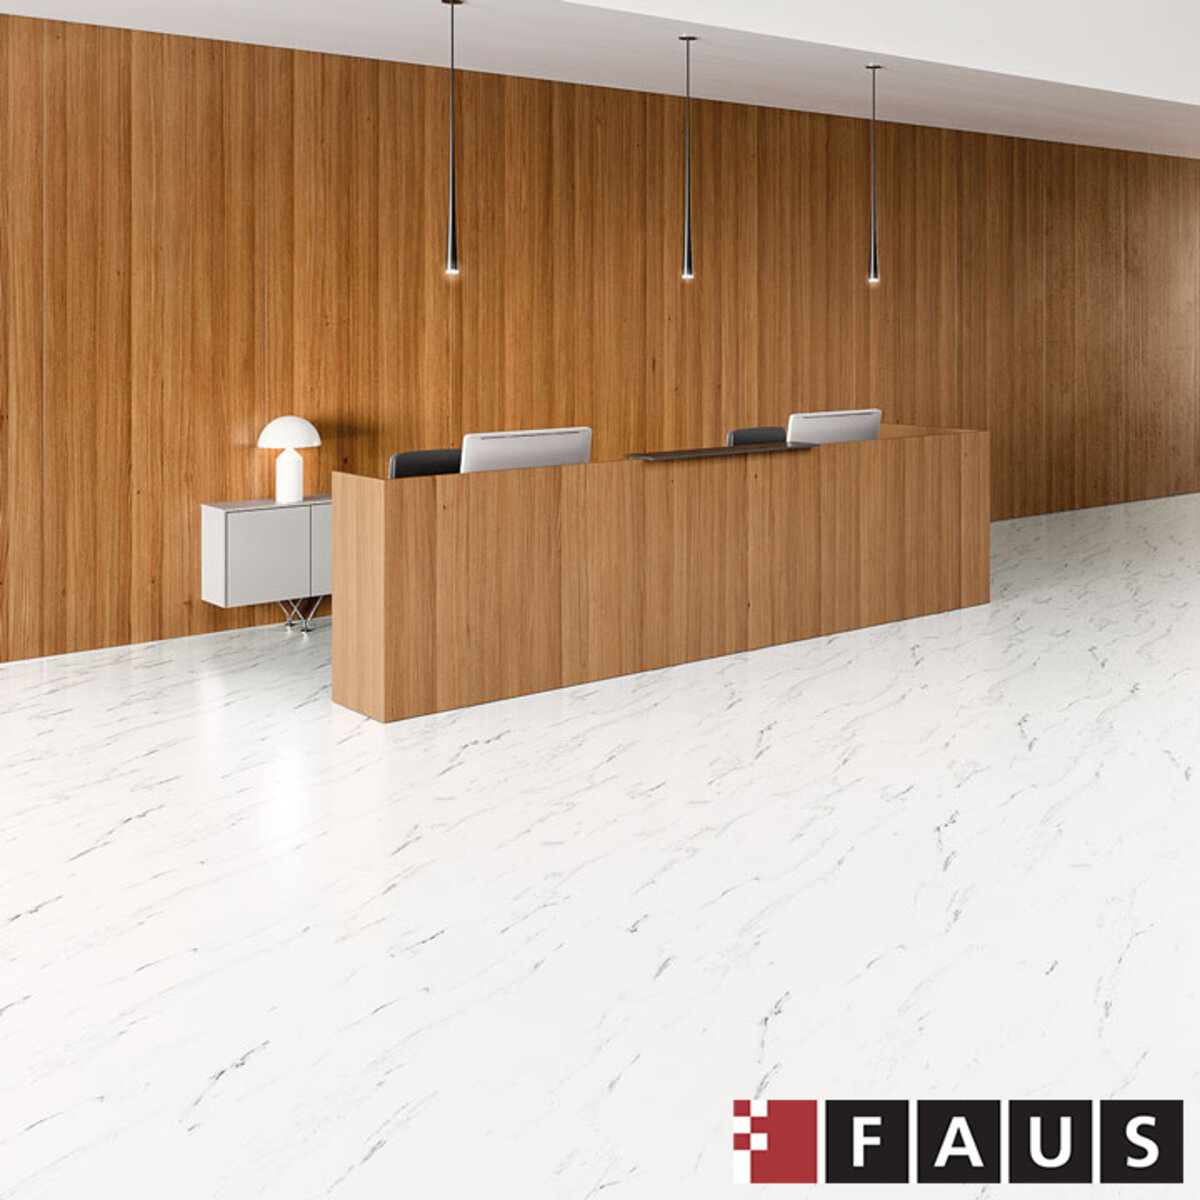 Faus White Marble Effect 8mm AC6 Laminate Flooring Planks- 2.13m² Per Pack